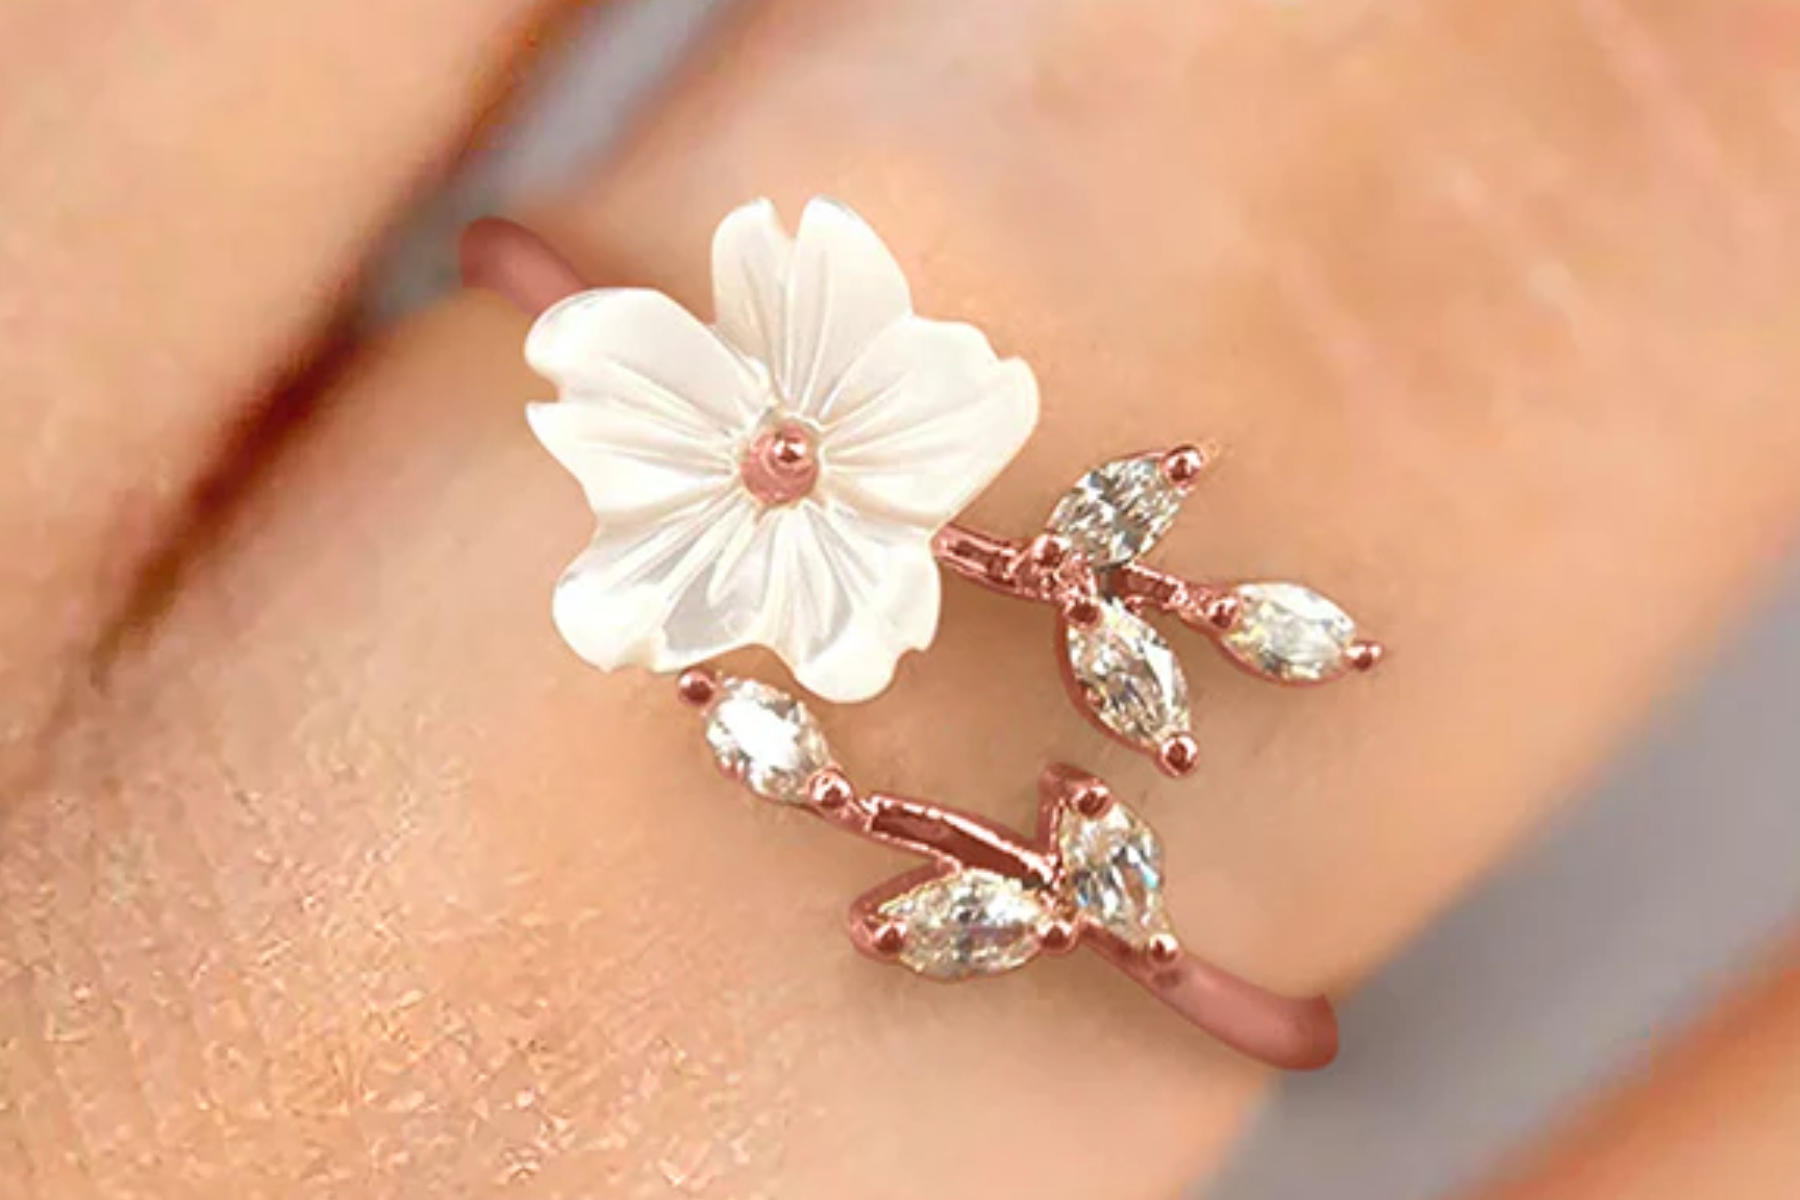 Flower Rings - Ultimate Bridal Accessory For Your Big Day